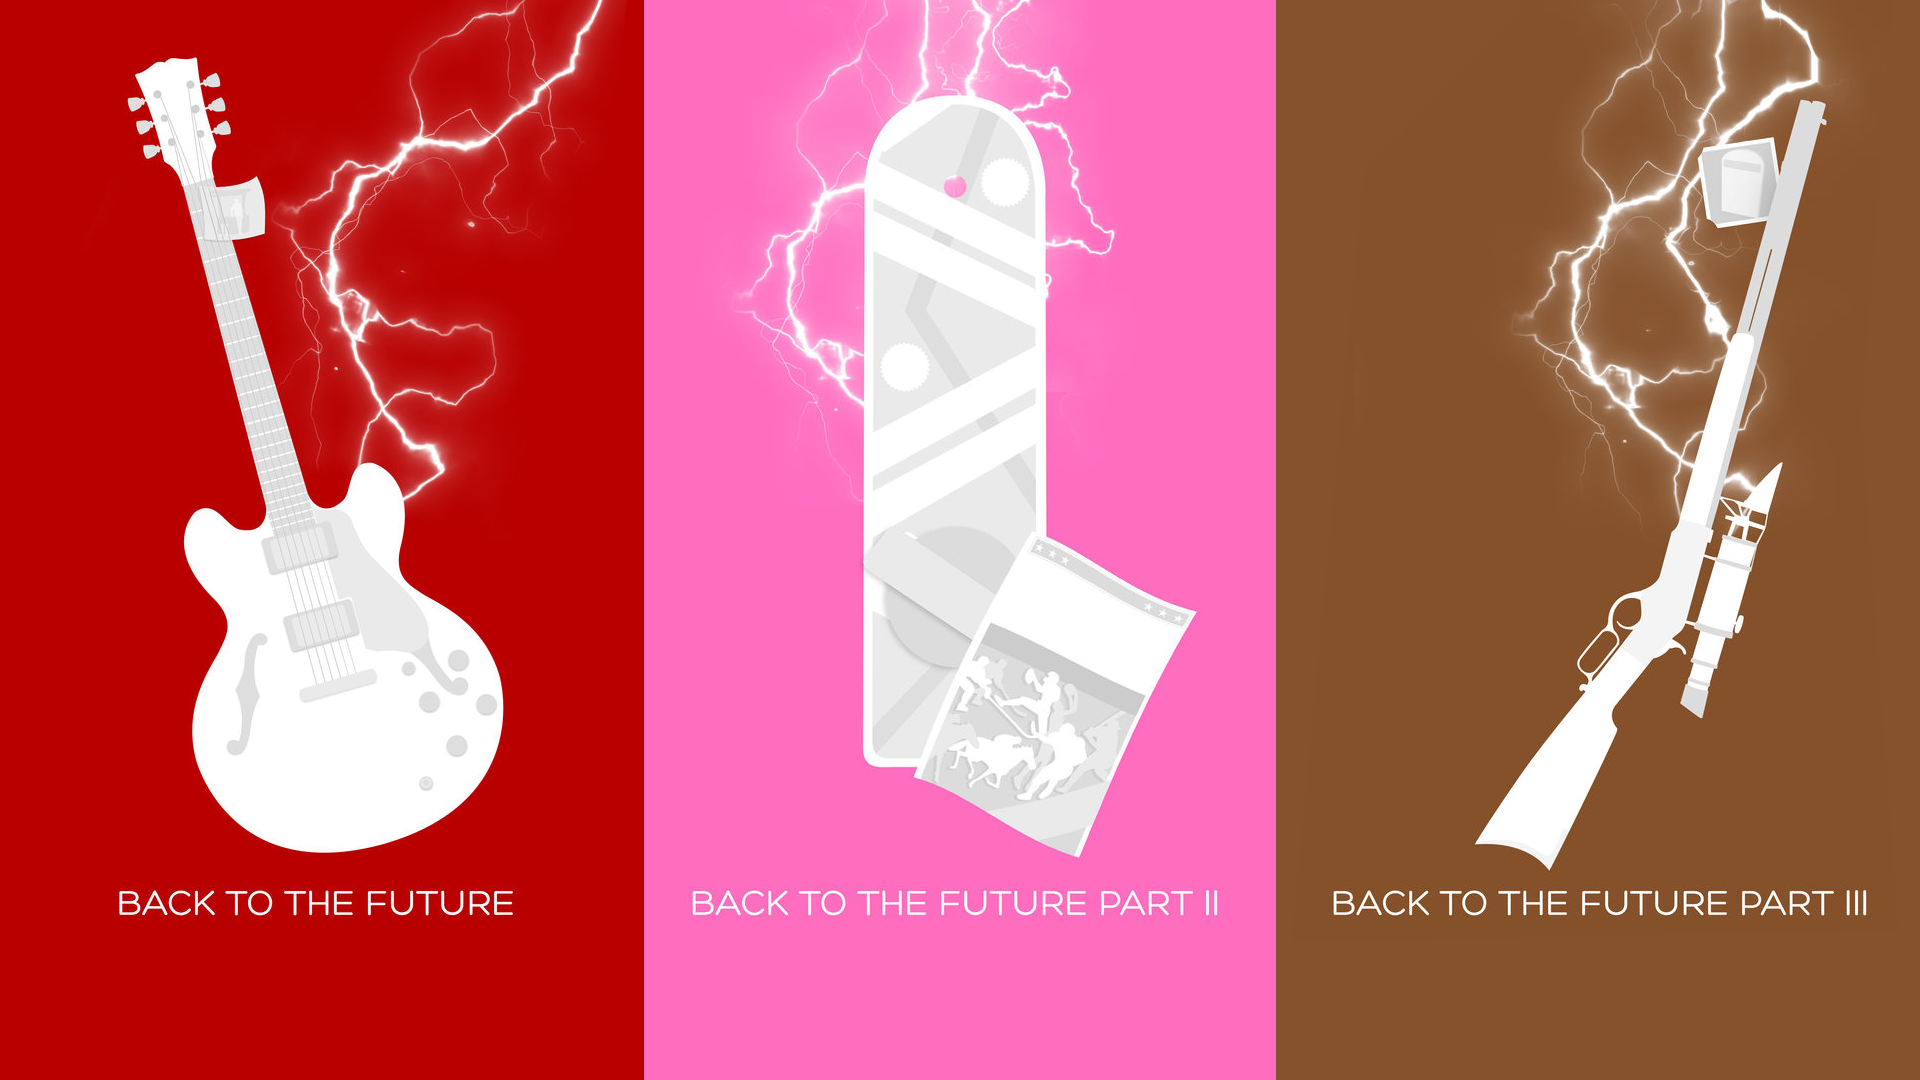 Back to the future by the same guy who did the Three Flavours ...